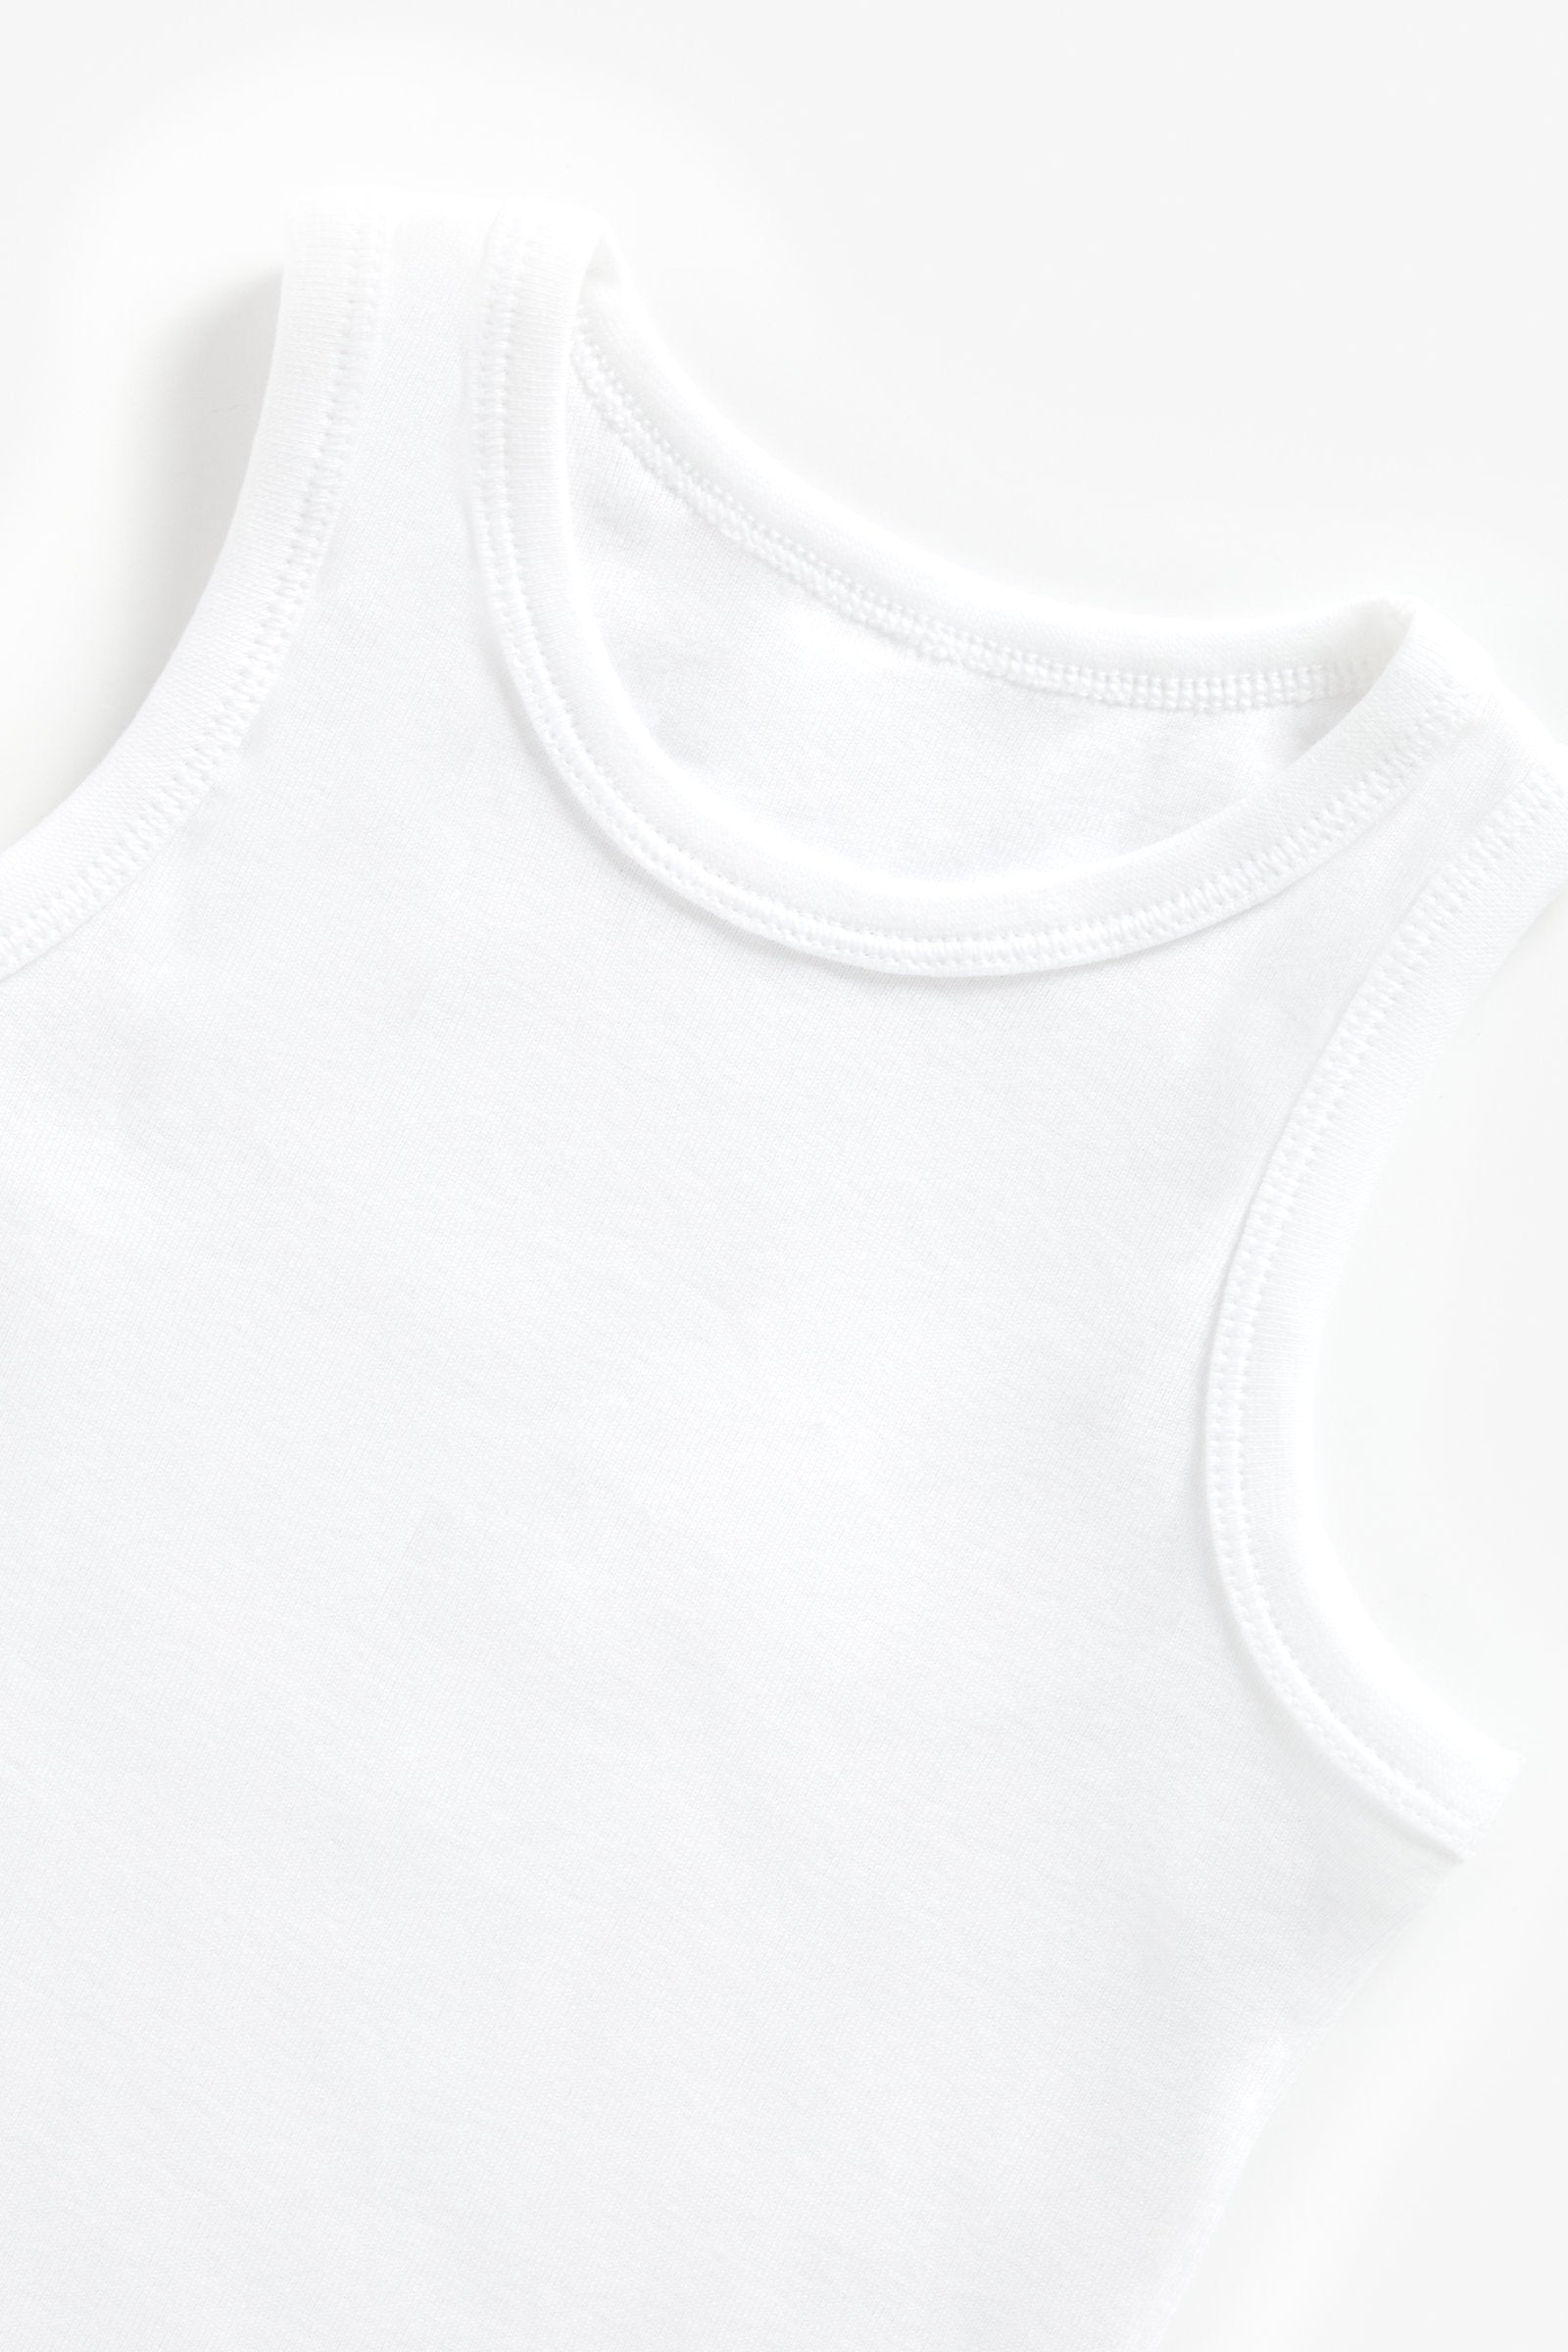 Mothercare White Vests - 5 Pack